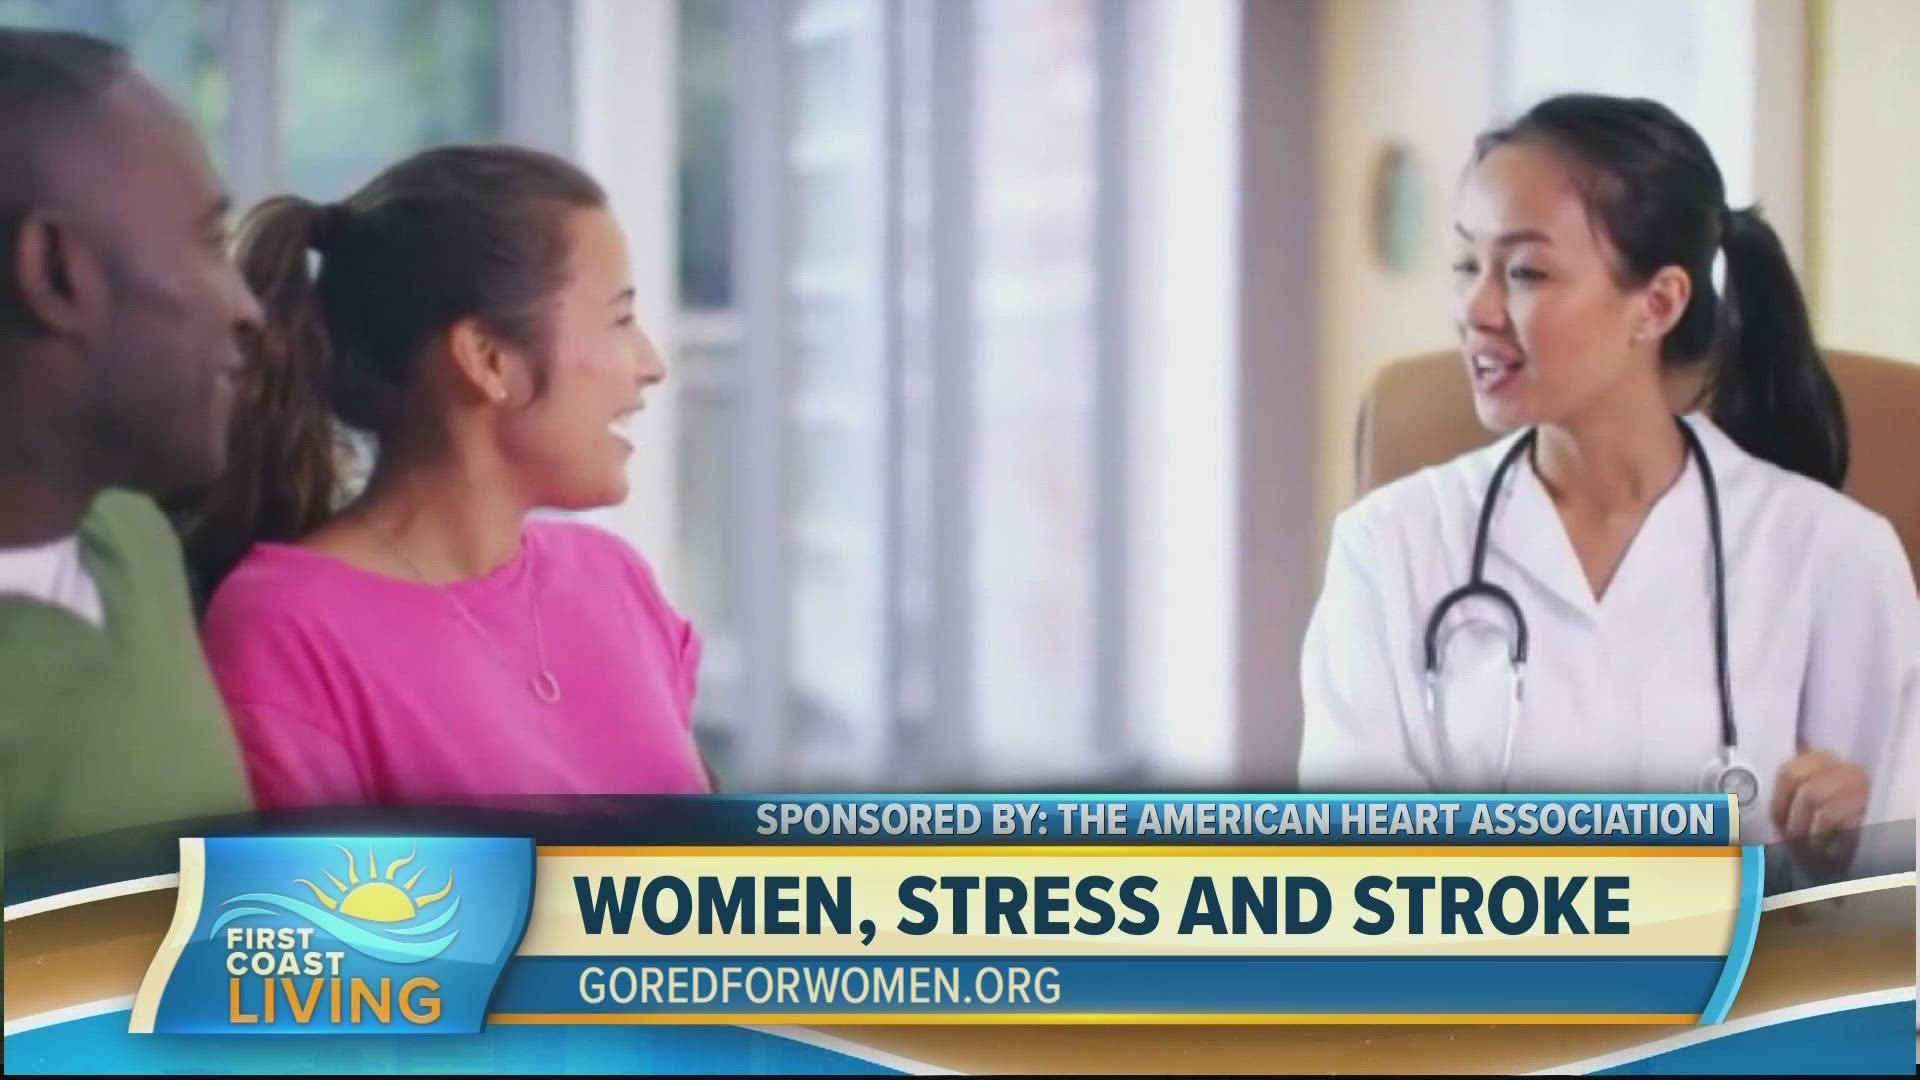 Dr. Jennifer Mieres discusses the unprecedented levels of chronic stress being experienced by women today and the potential long-term impact on their overall health.